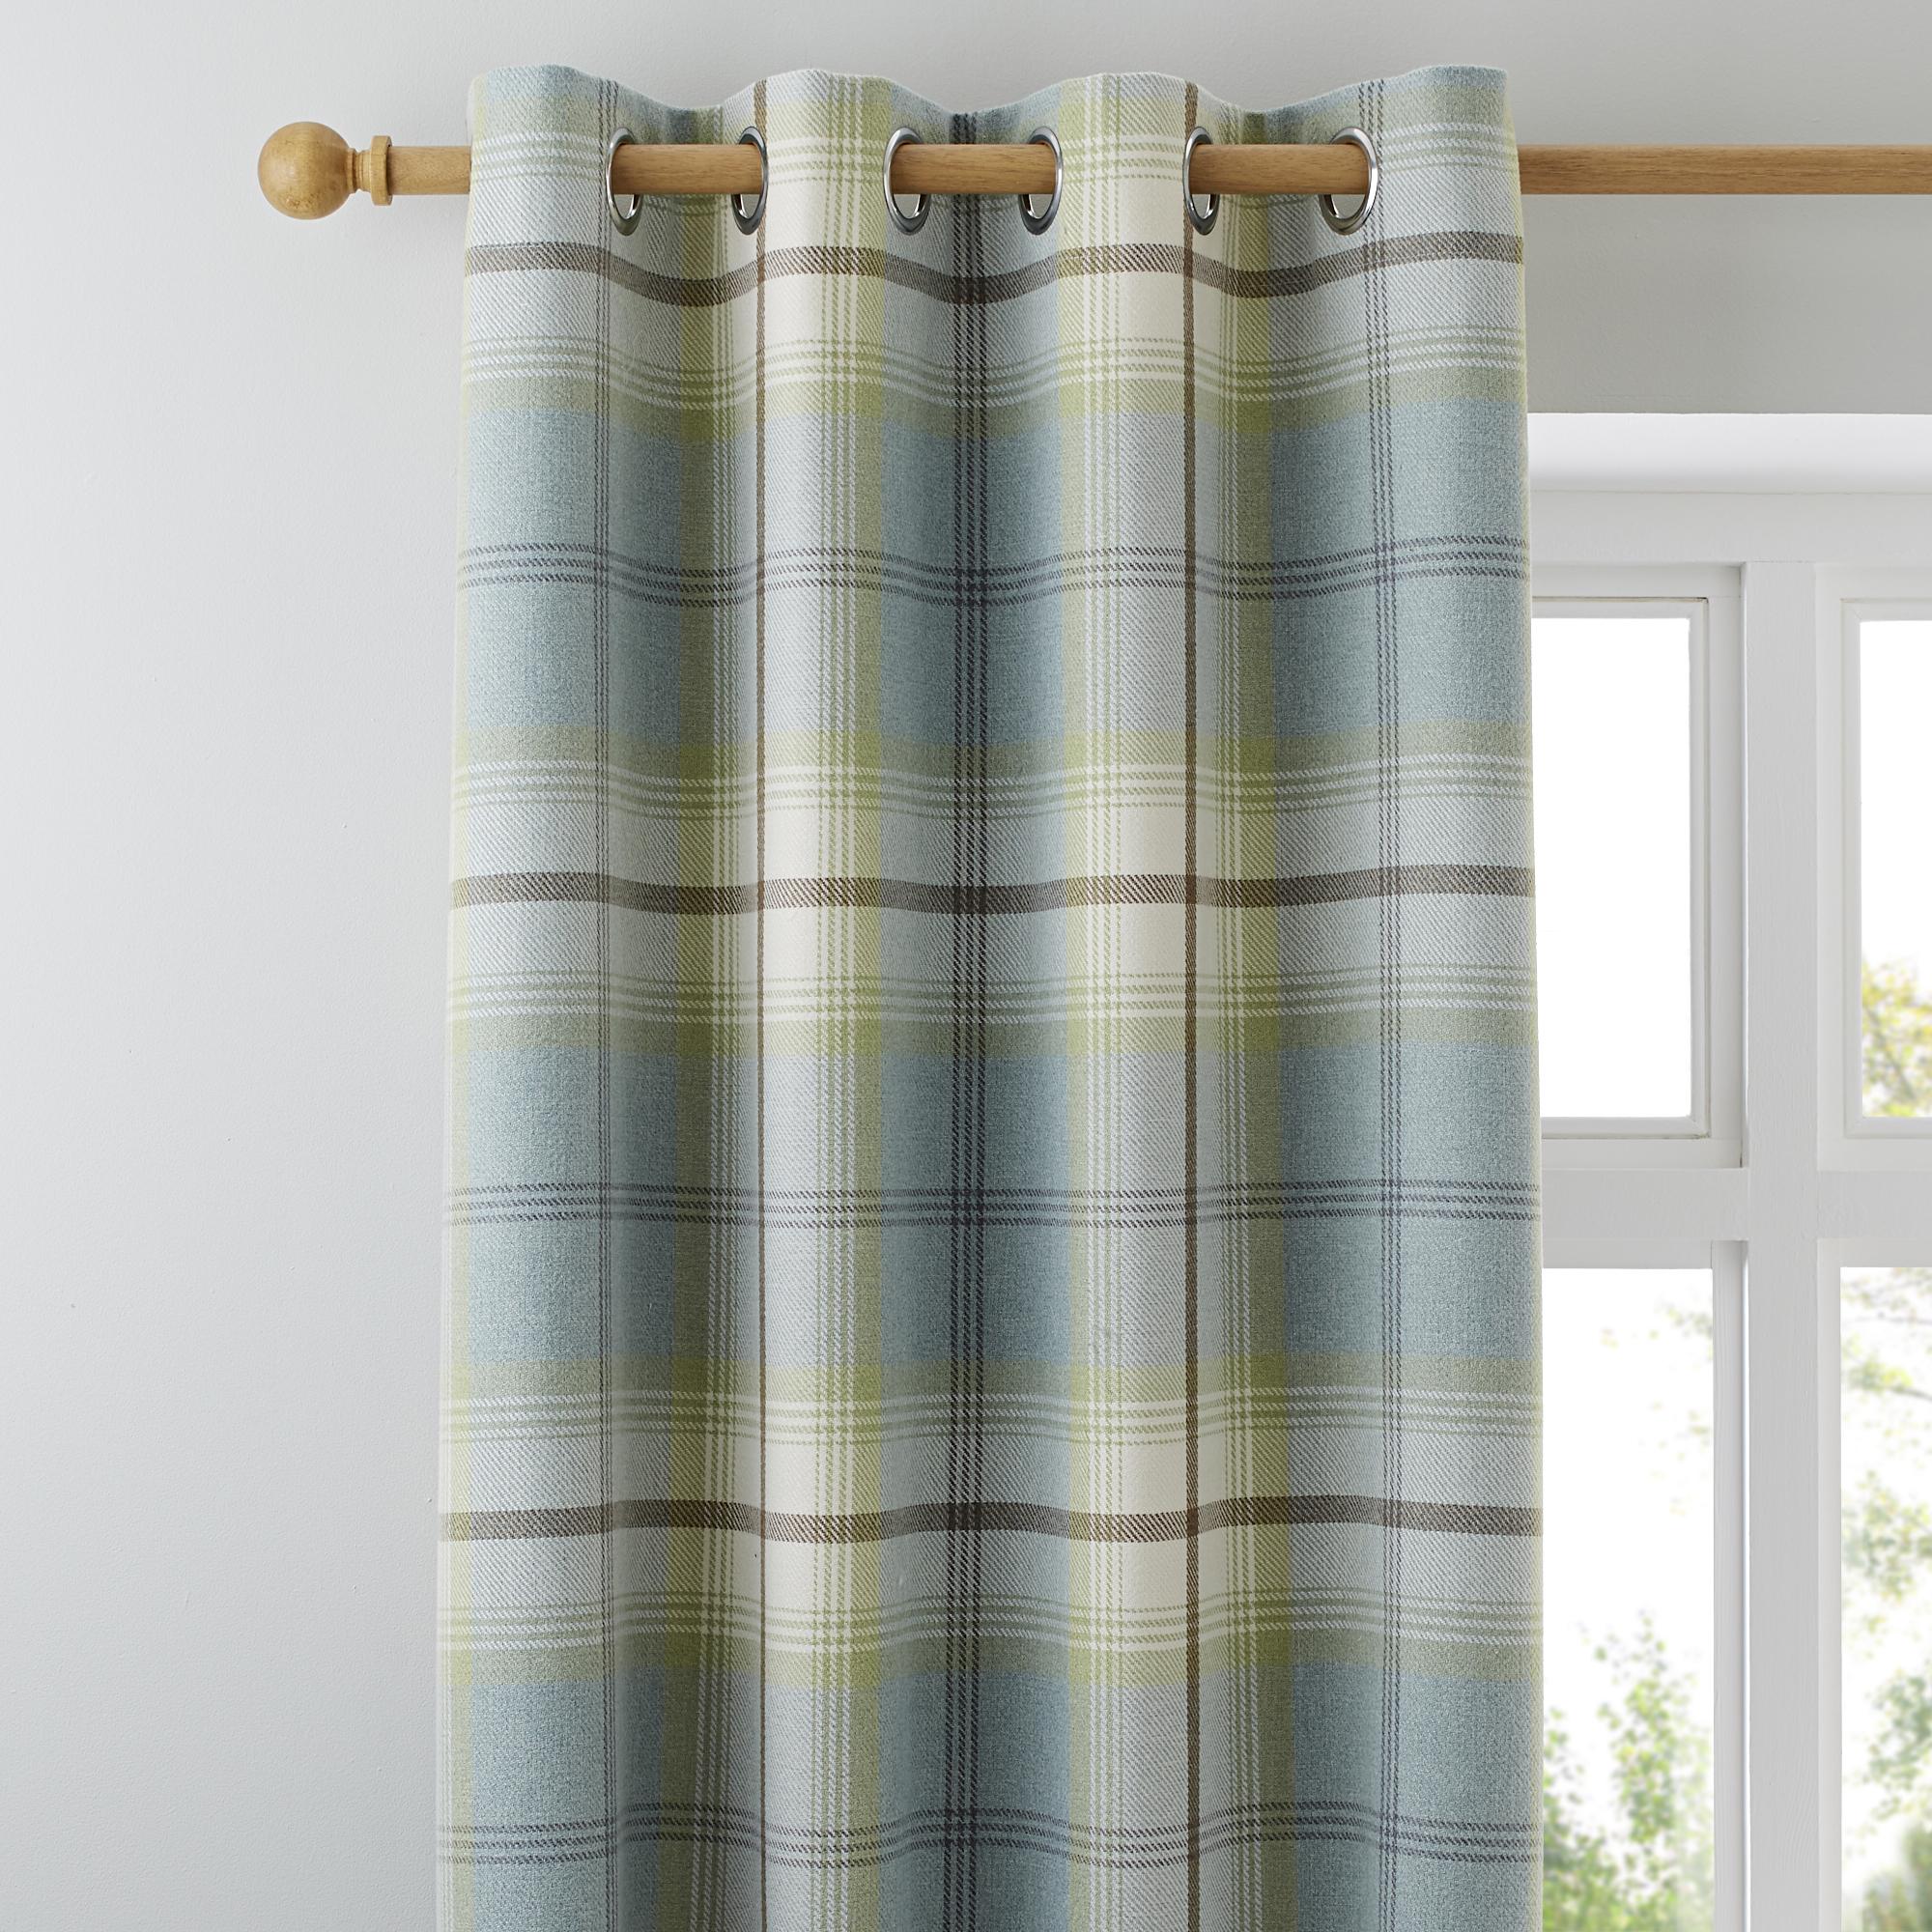 Highland Check Duck-Egg Lined Eyelet Curtains | Dunelm